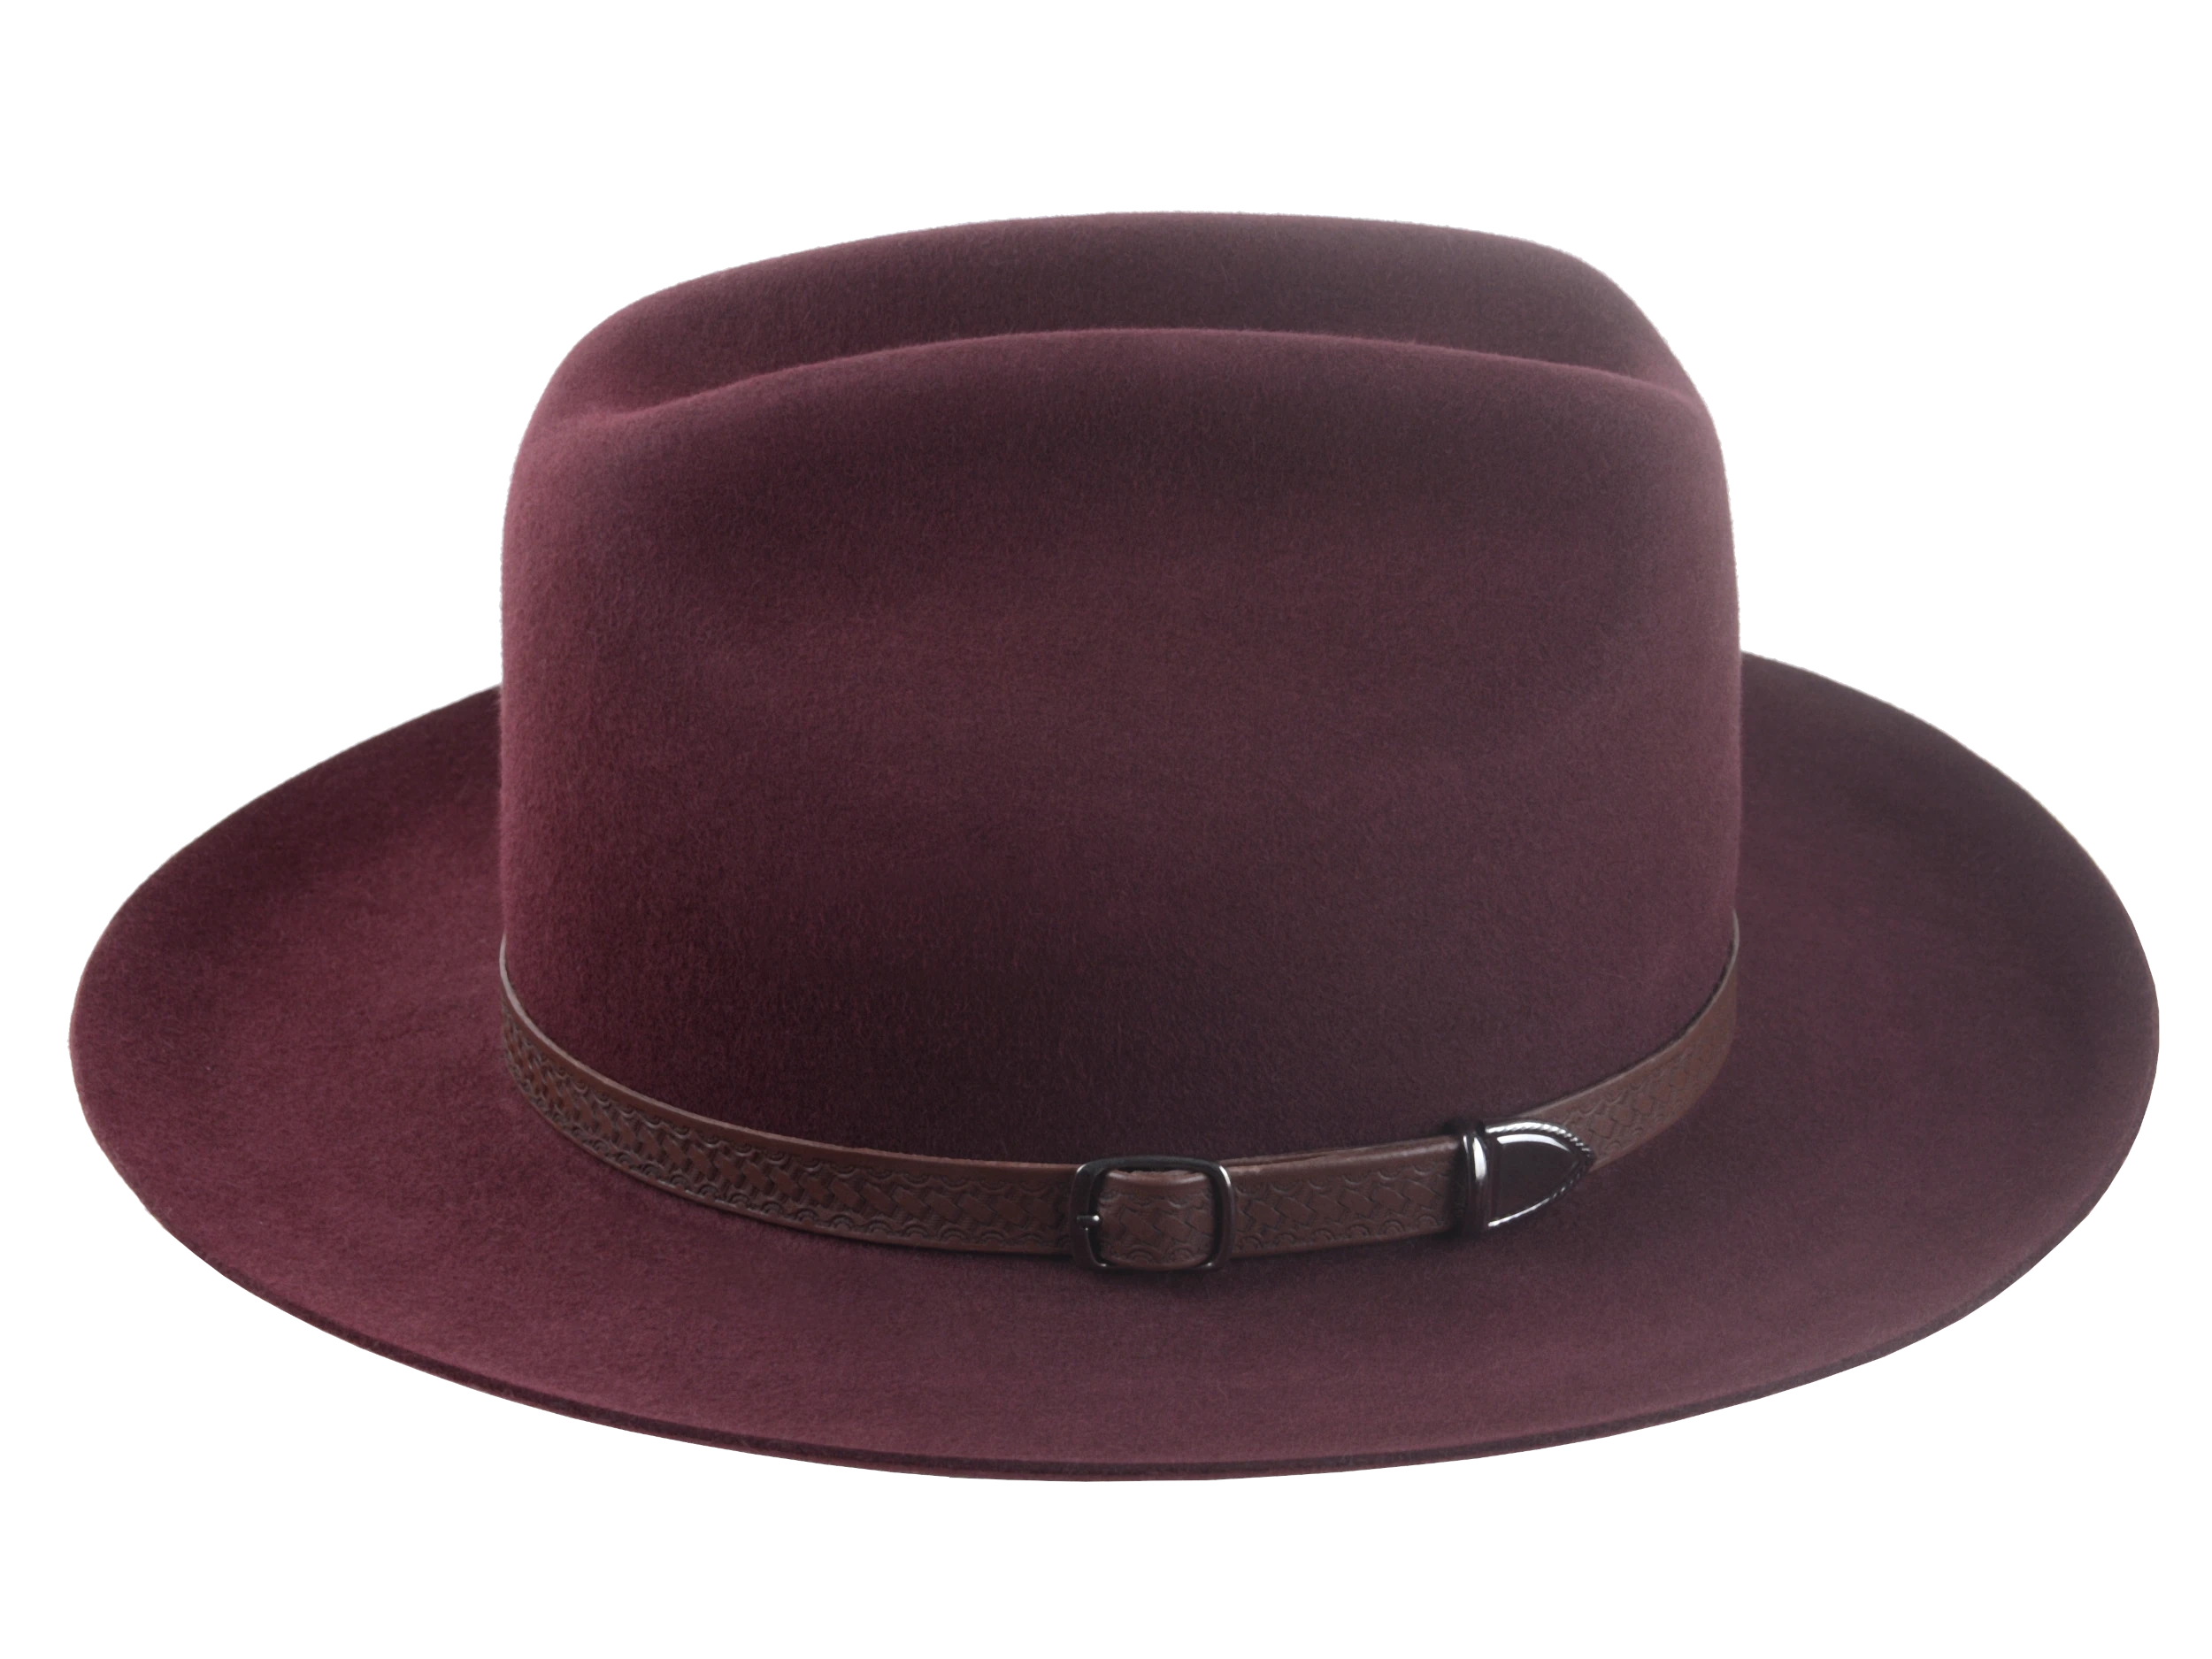 The Patriot: Side angle showing the elegant 5 1/2" crown height and smooth burgundy finish | Agnoulita Hats